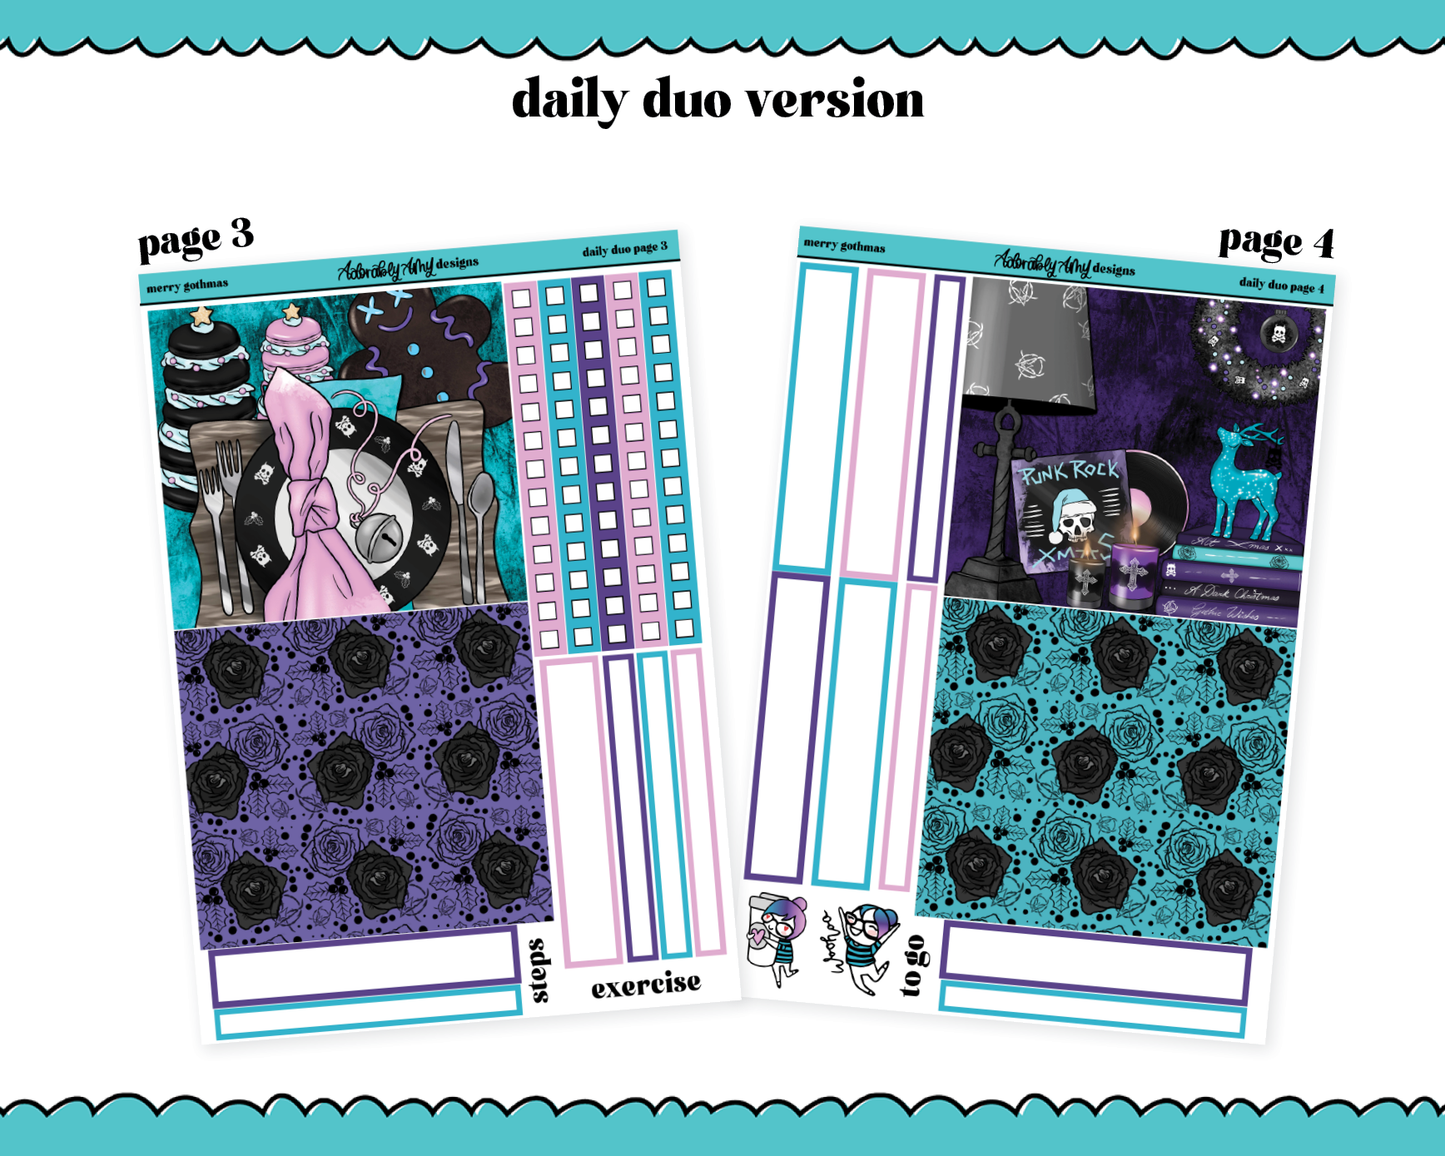 Daily Duo Merry Gothmas Christmas Themed Weekly Planner Sticker Kit for Daily Duo Planner